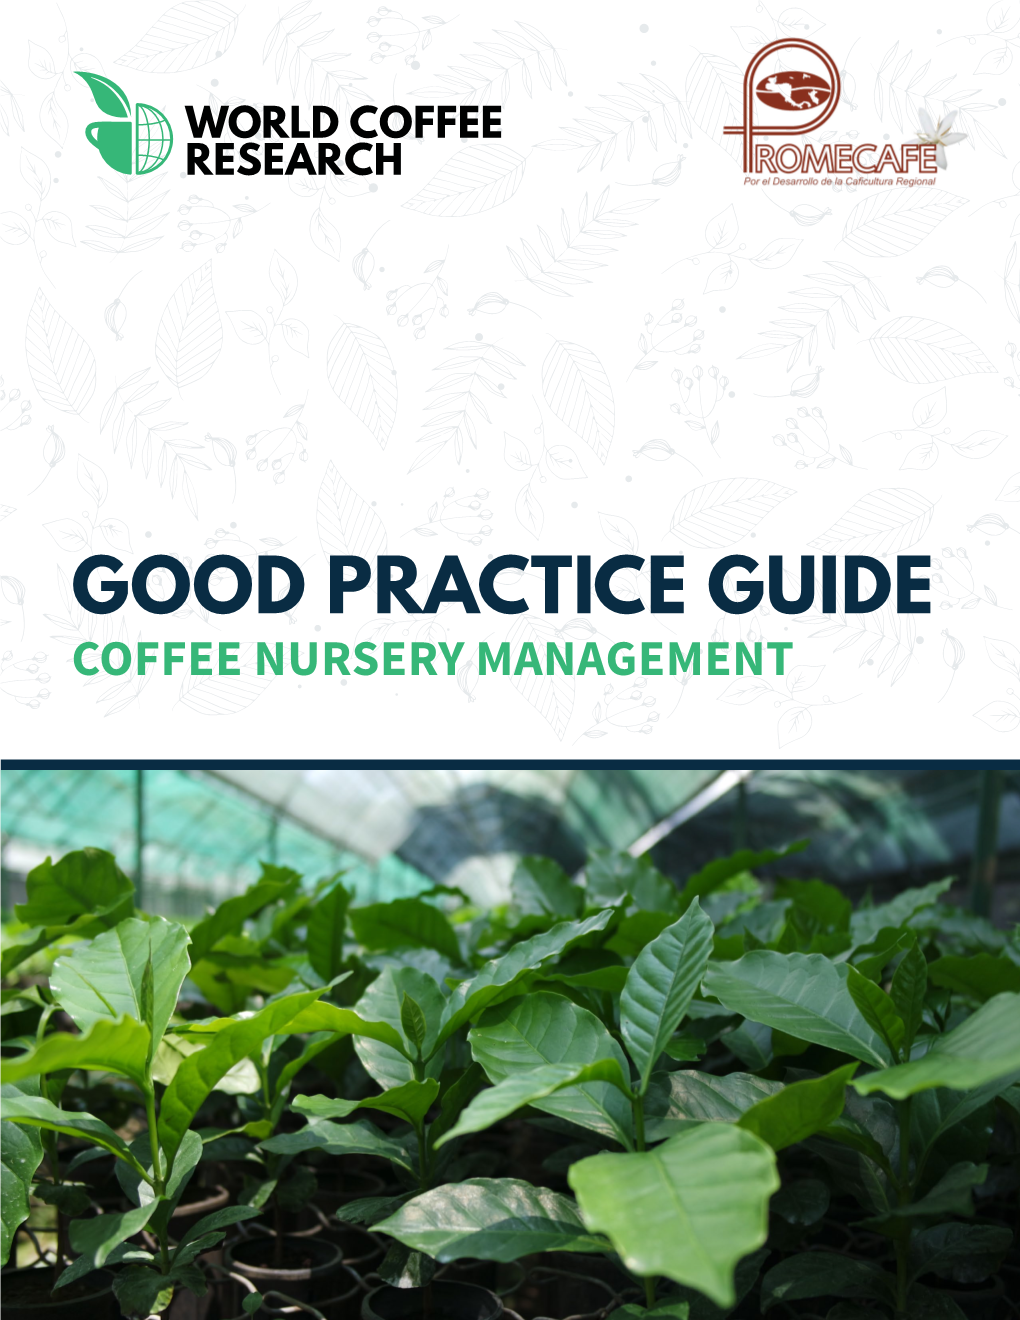 Good Practice Guide: Coffee Nursery Management